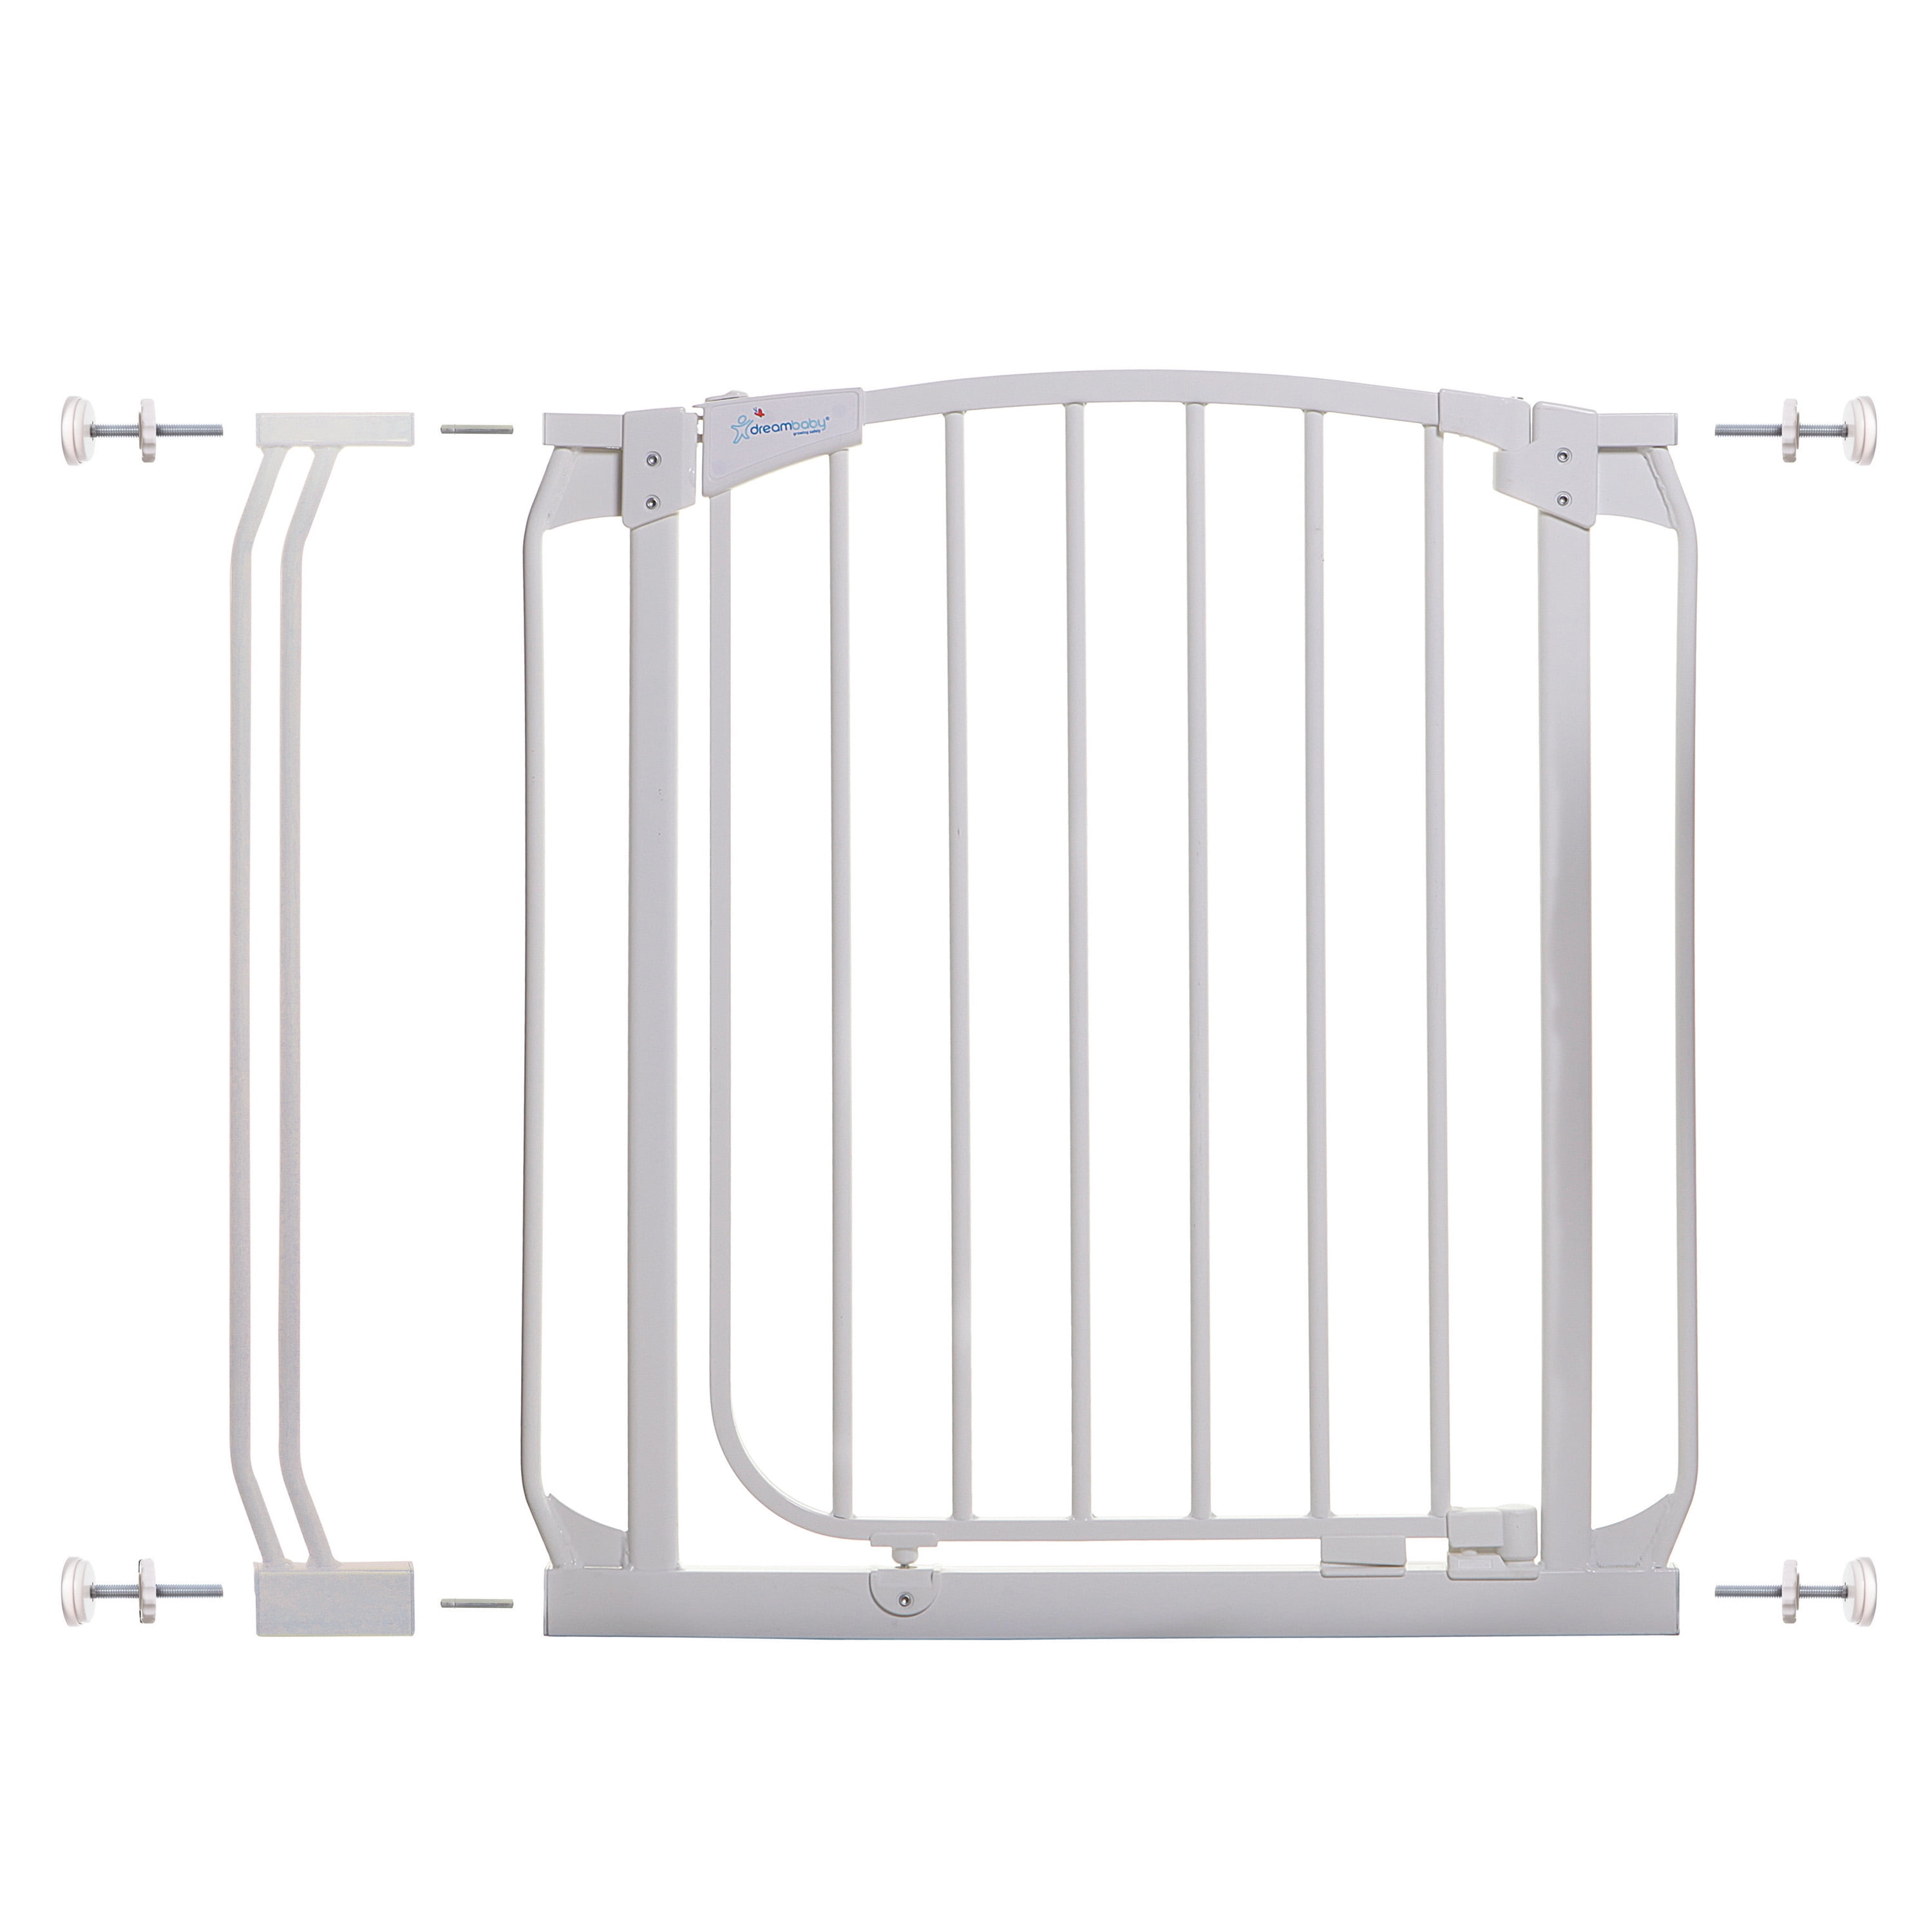 27cm W/100cm H Dreambaby Chelsea Tall Child Safety Gate Extension White 